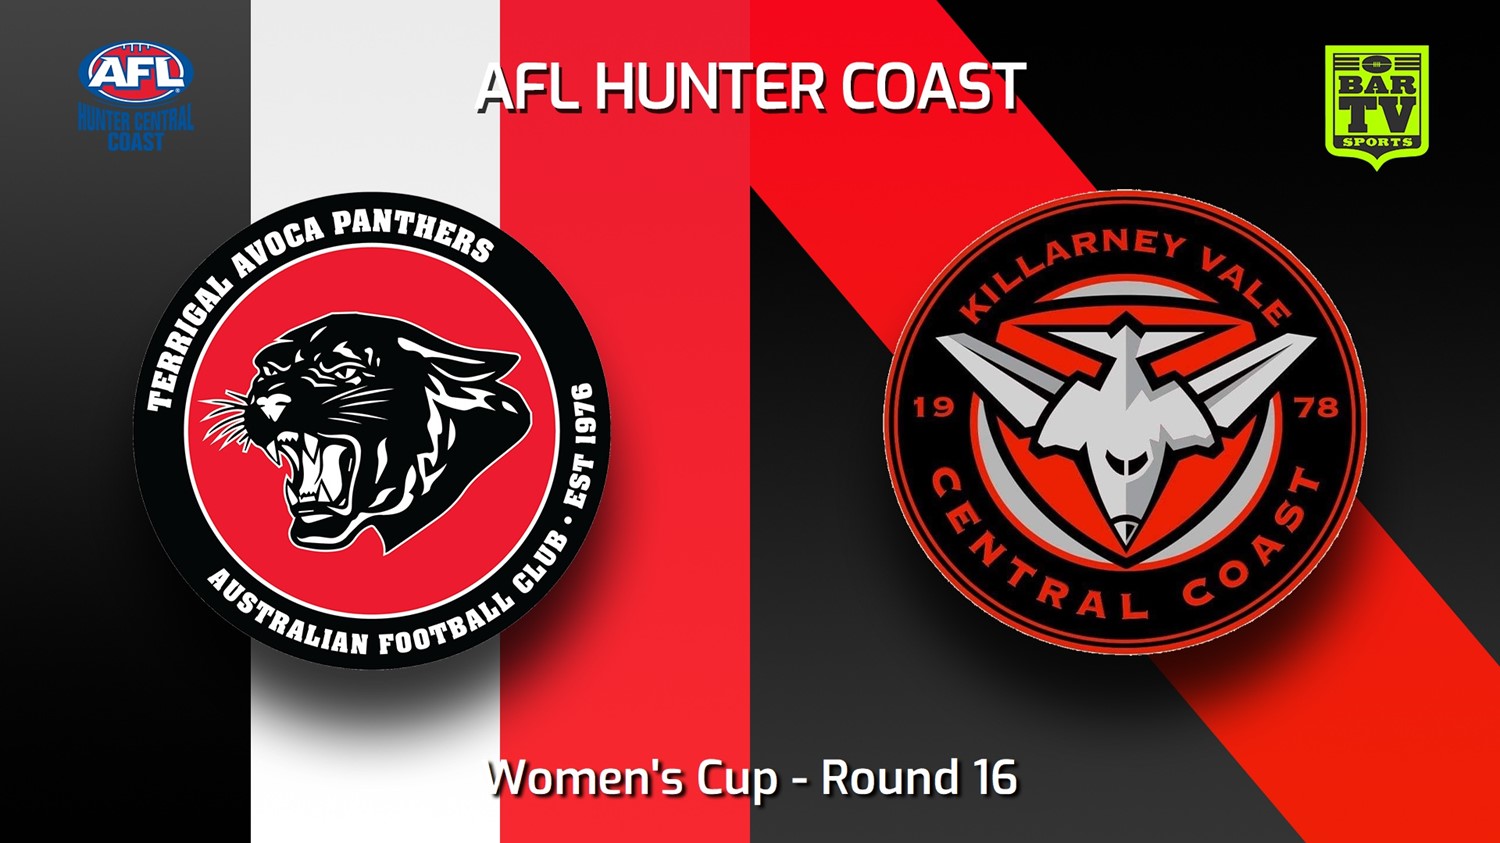 230805-AFL Hunter Central Coast Round 16 - Women's Cup - Terrigal Avoca Panthers v Killarney Vale Bombers Minigame Slate Image